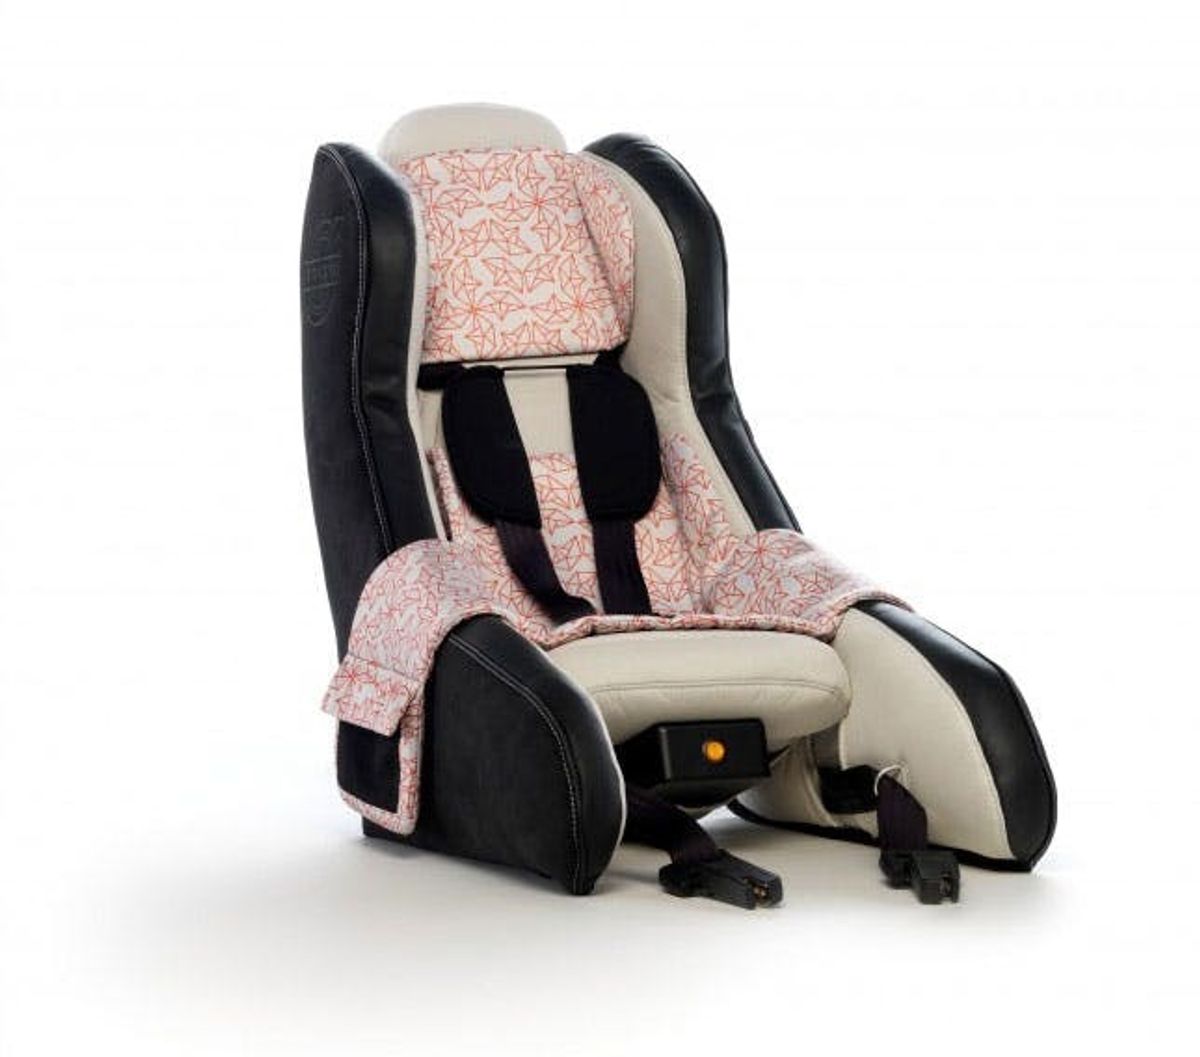 Volvo’s New Child Car Seat Inflates in Under a Minute!